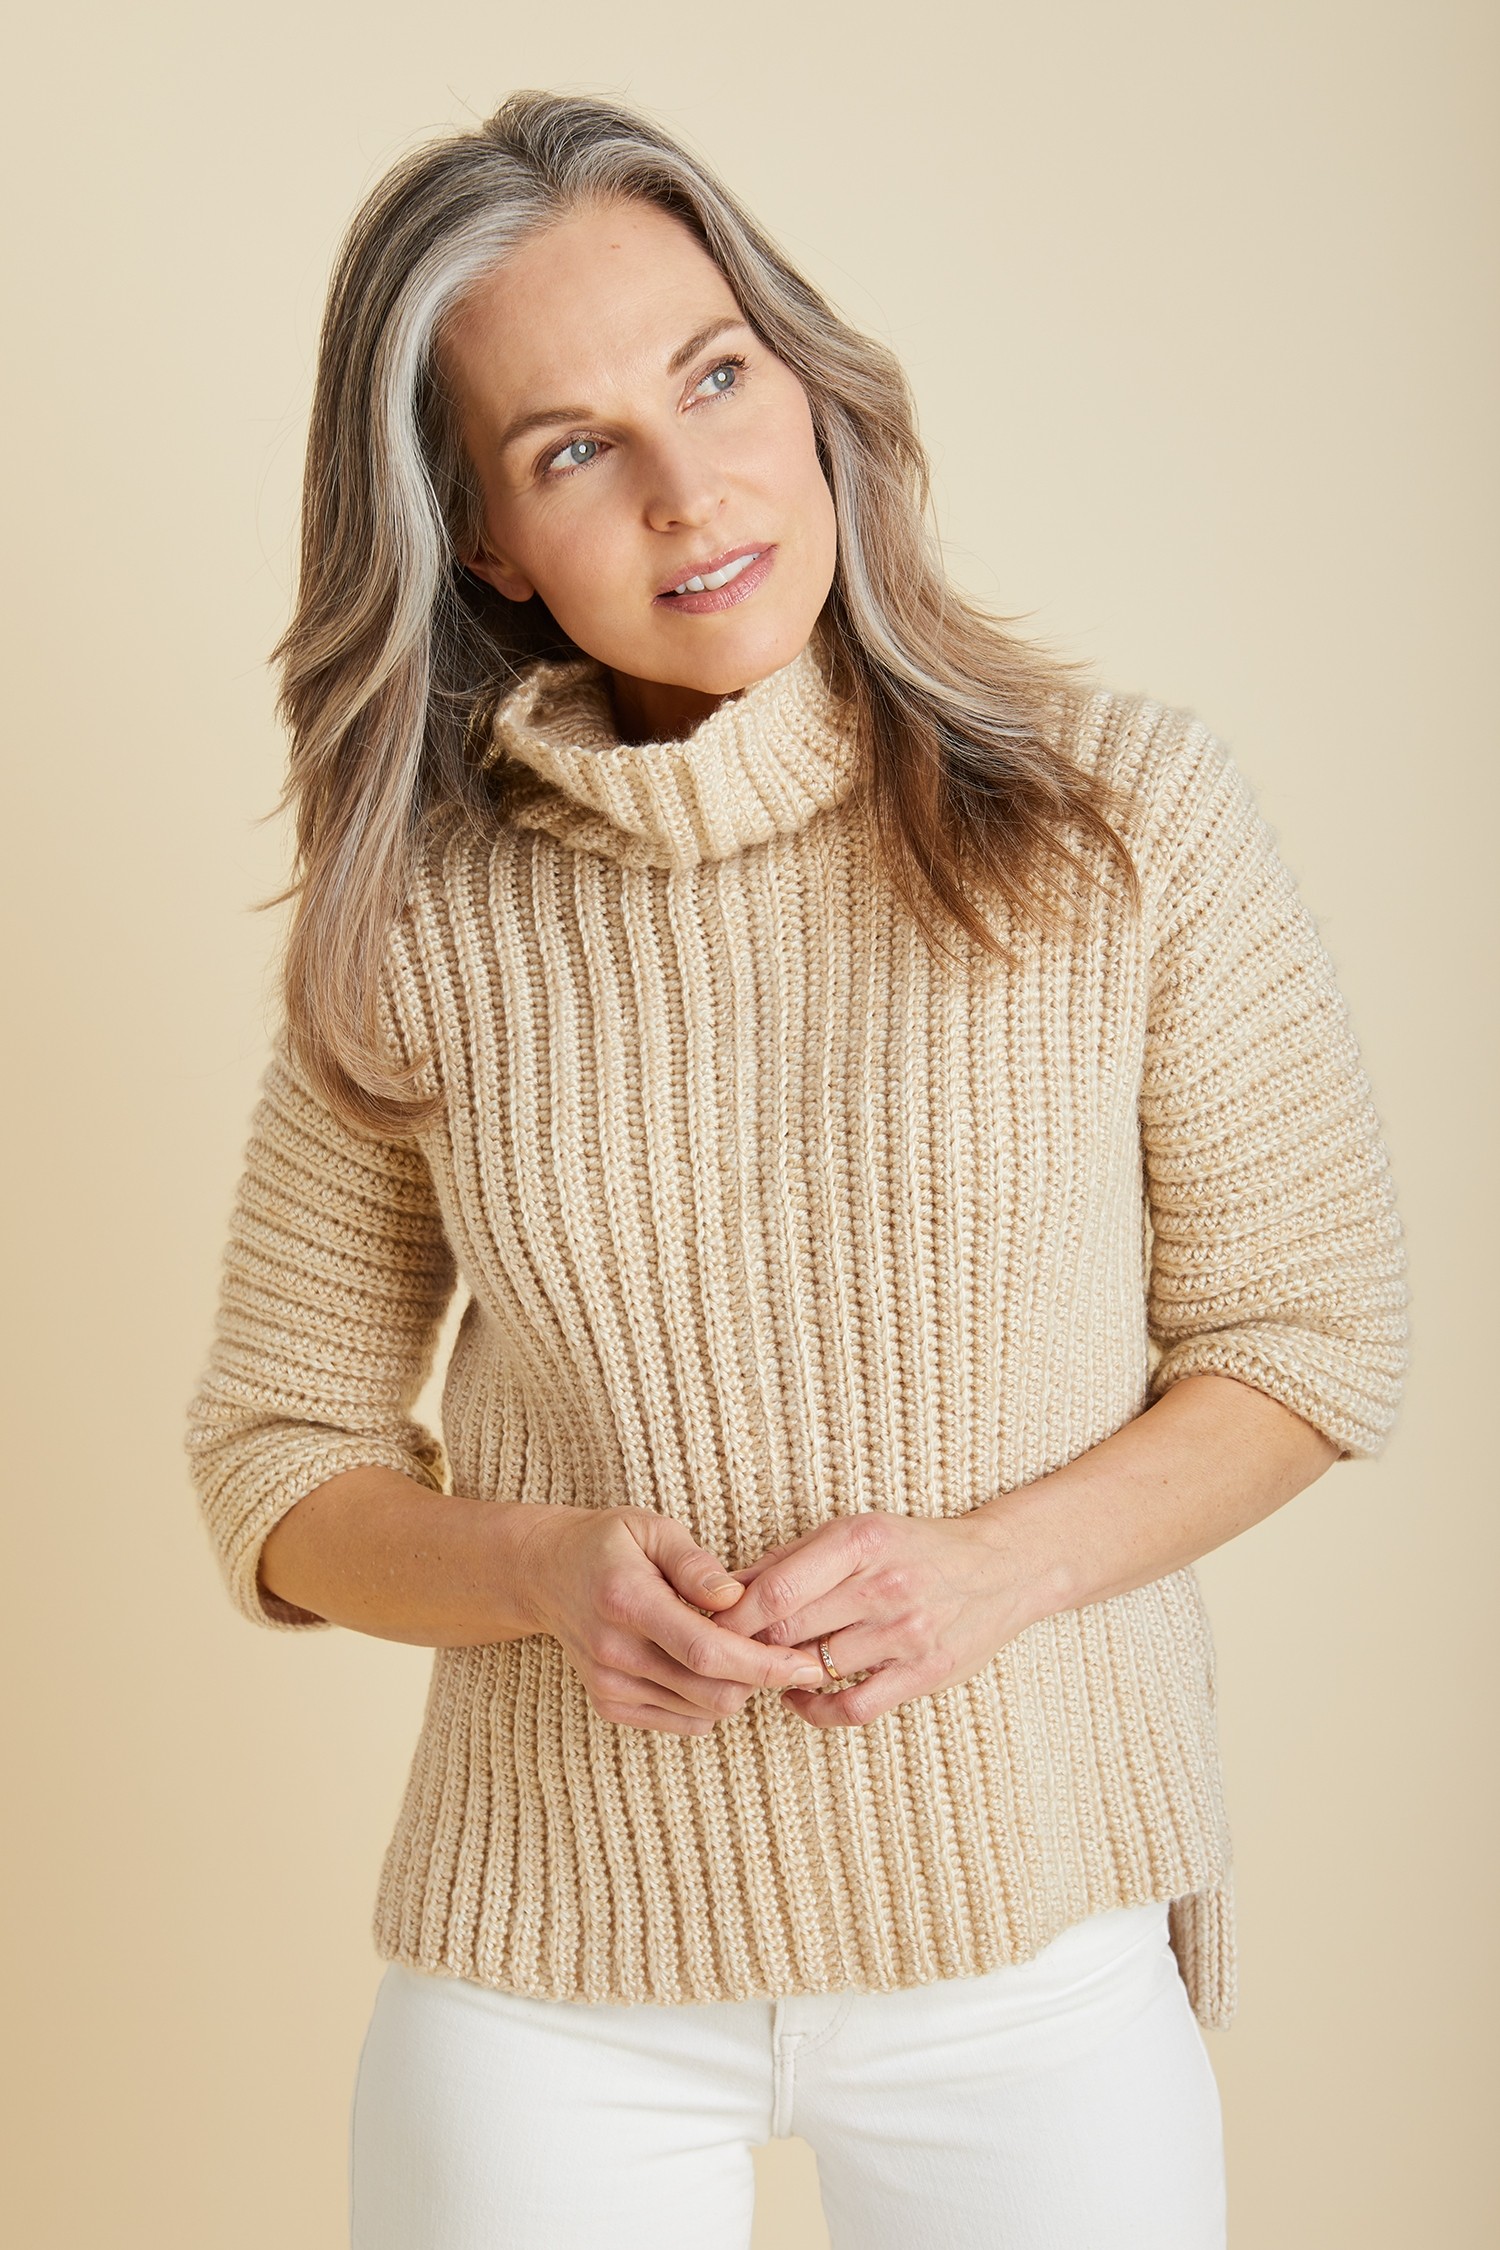 Simply Constructed Pullover (Crochet)